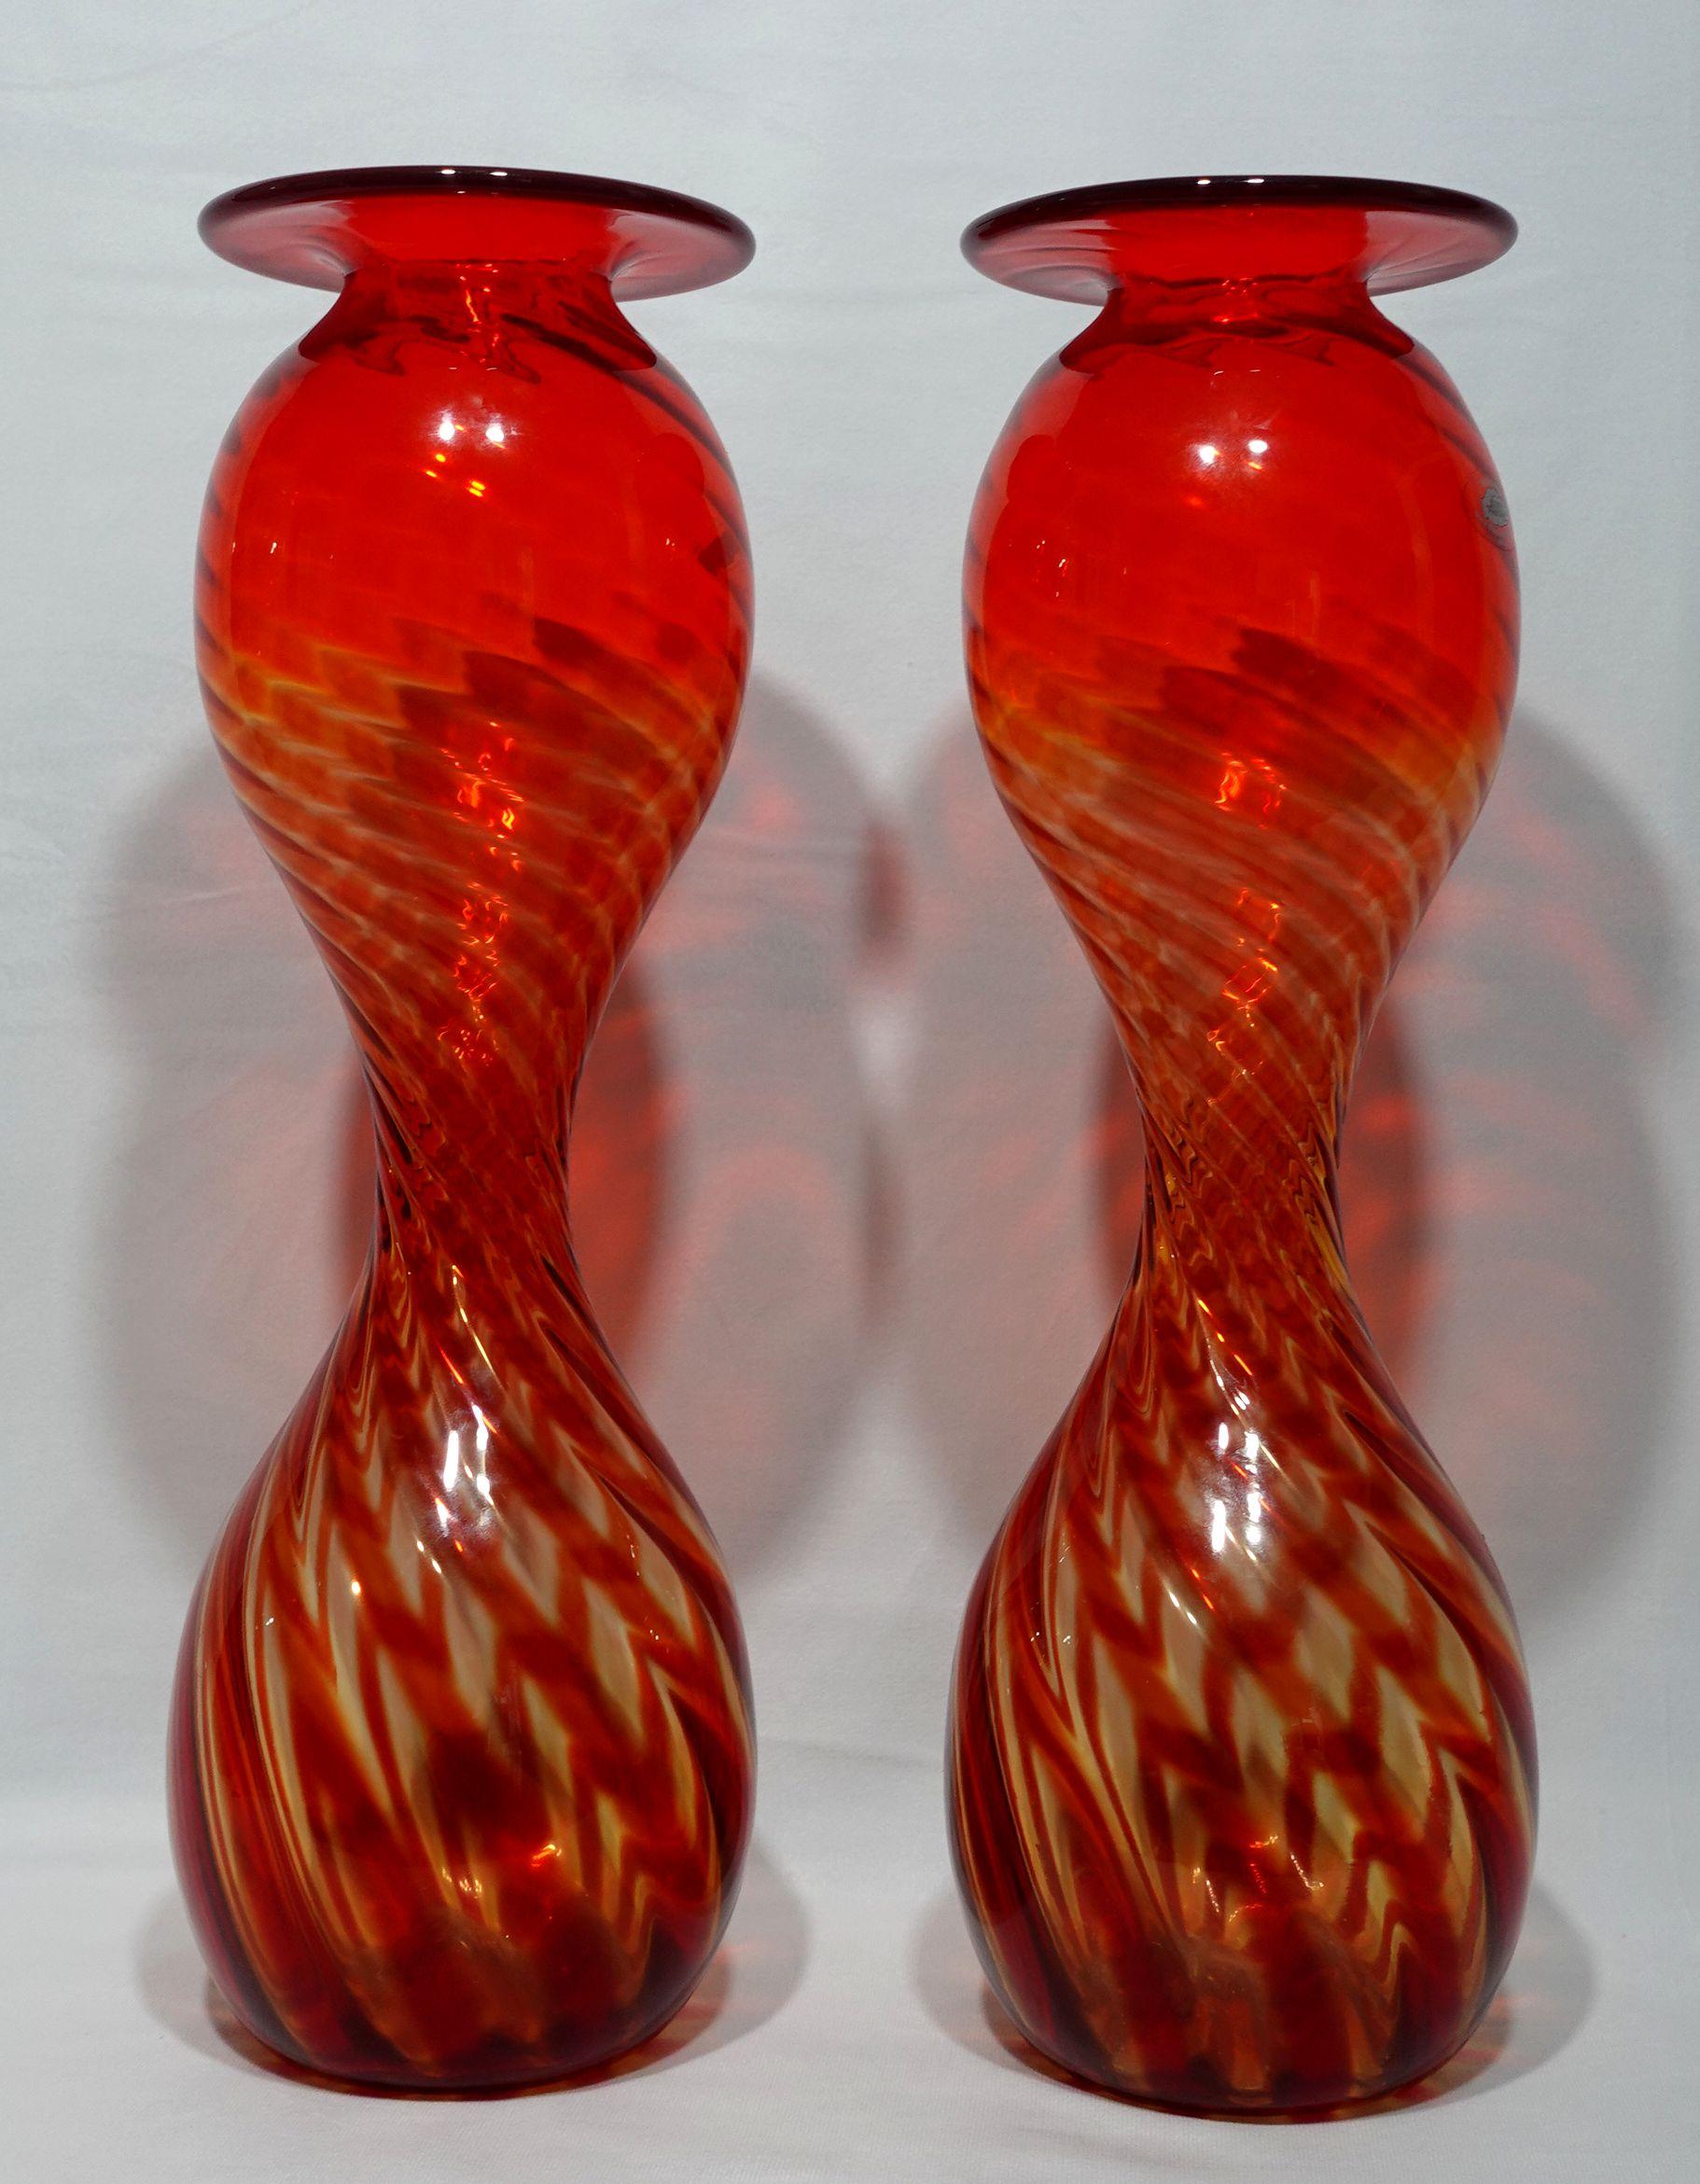 A Pair of Large Blenko Handblown Hourglass Optic Oversized Glass Vases, Milton, West Virginia, c 1970

A Pair of oversized glass optic vases by Blenko. A model #2129, the vases have hourglass shapes and have red and yellow stripes with the original